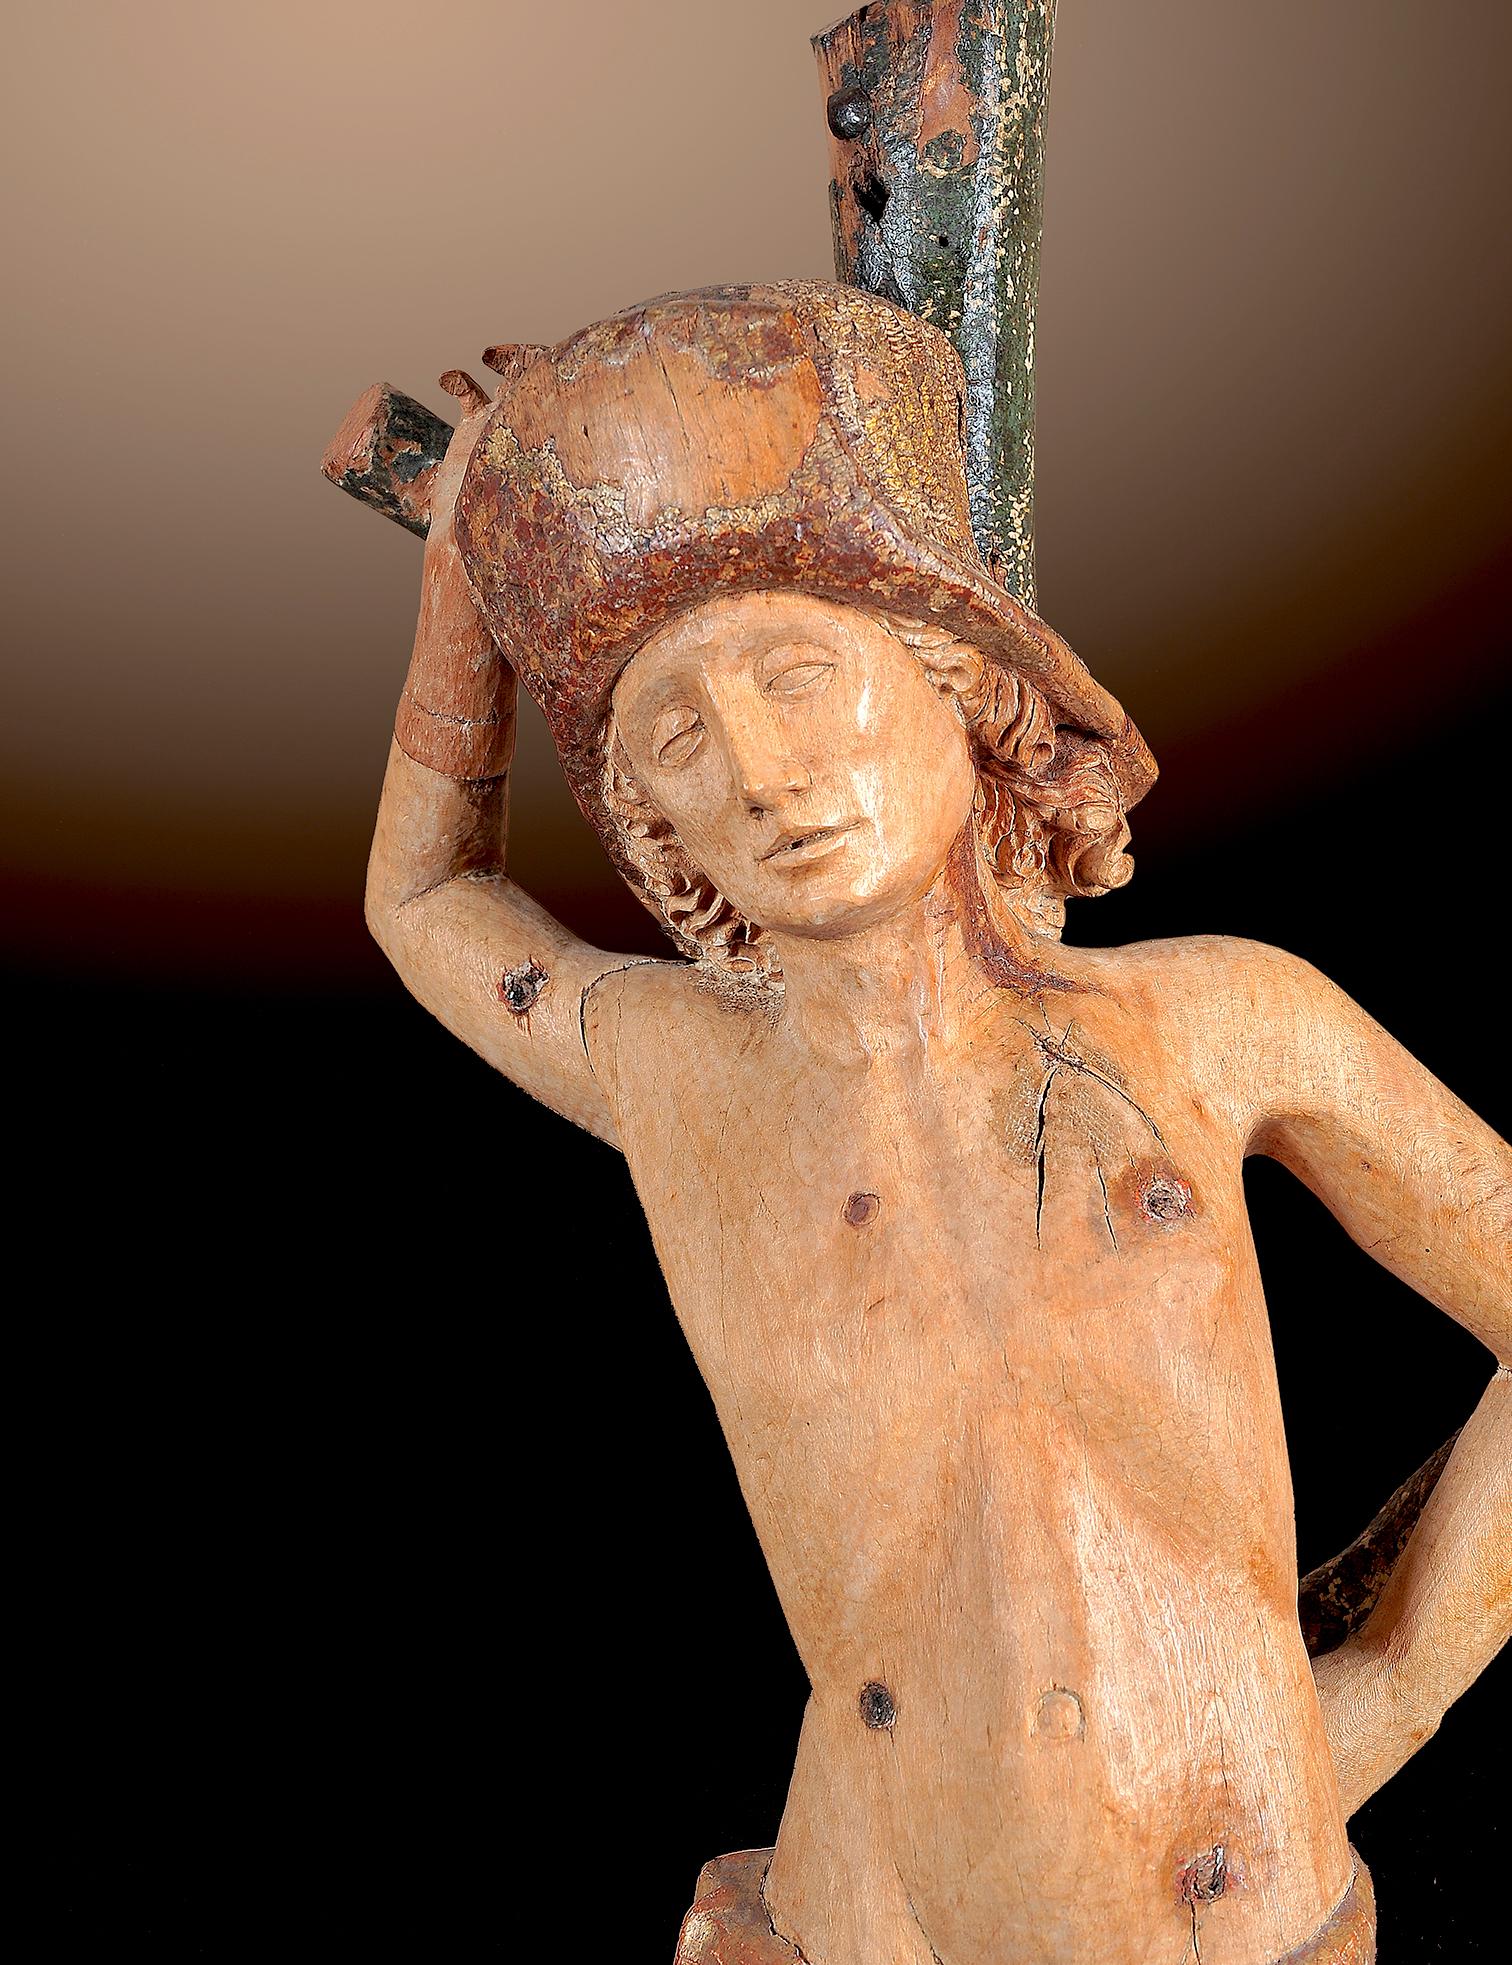 REMARKABLE SCULPTURE 
“St. Sebastian”
Tyrol/South Tyrol 
Around 1500 
Lime wood carved 
Remains of the original polychromy 
Height 70 cm 

The figure of Saint Sebastian (70 cm) was made in the Alpine region around 1500. The naked youth is depicted